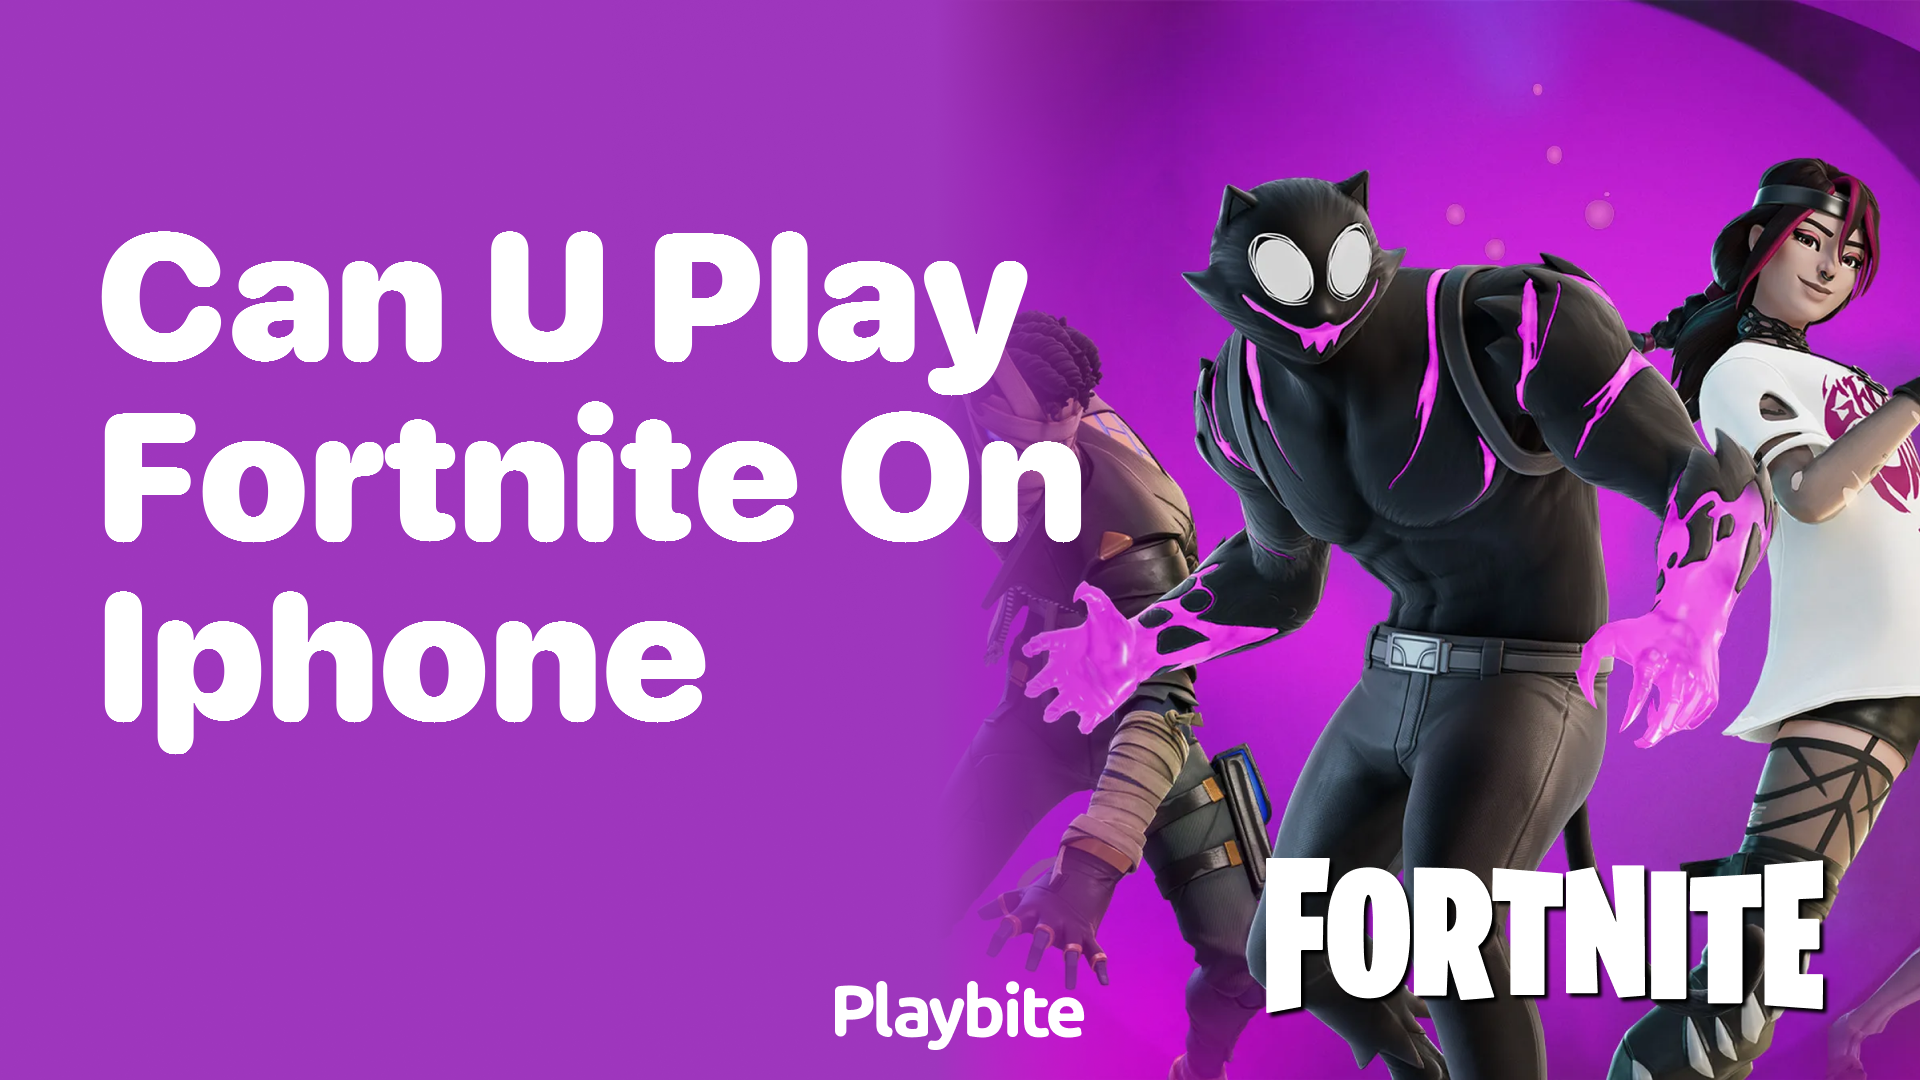 Can You Play Fortnite on iPhone? Let’s Find Out!